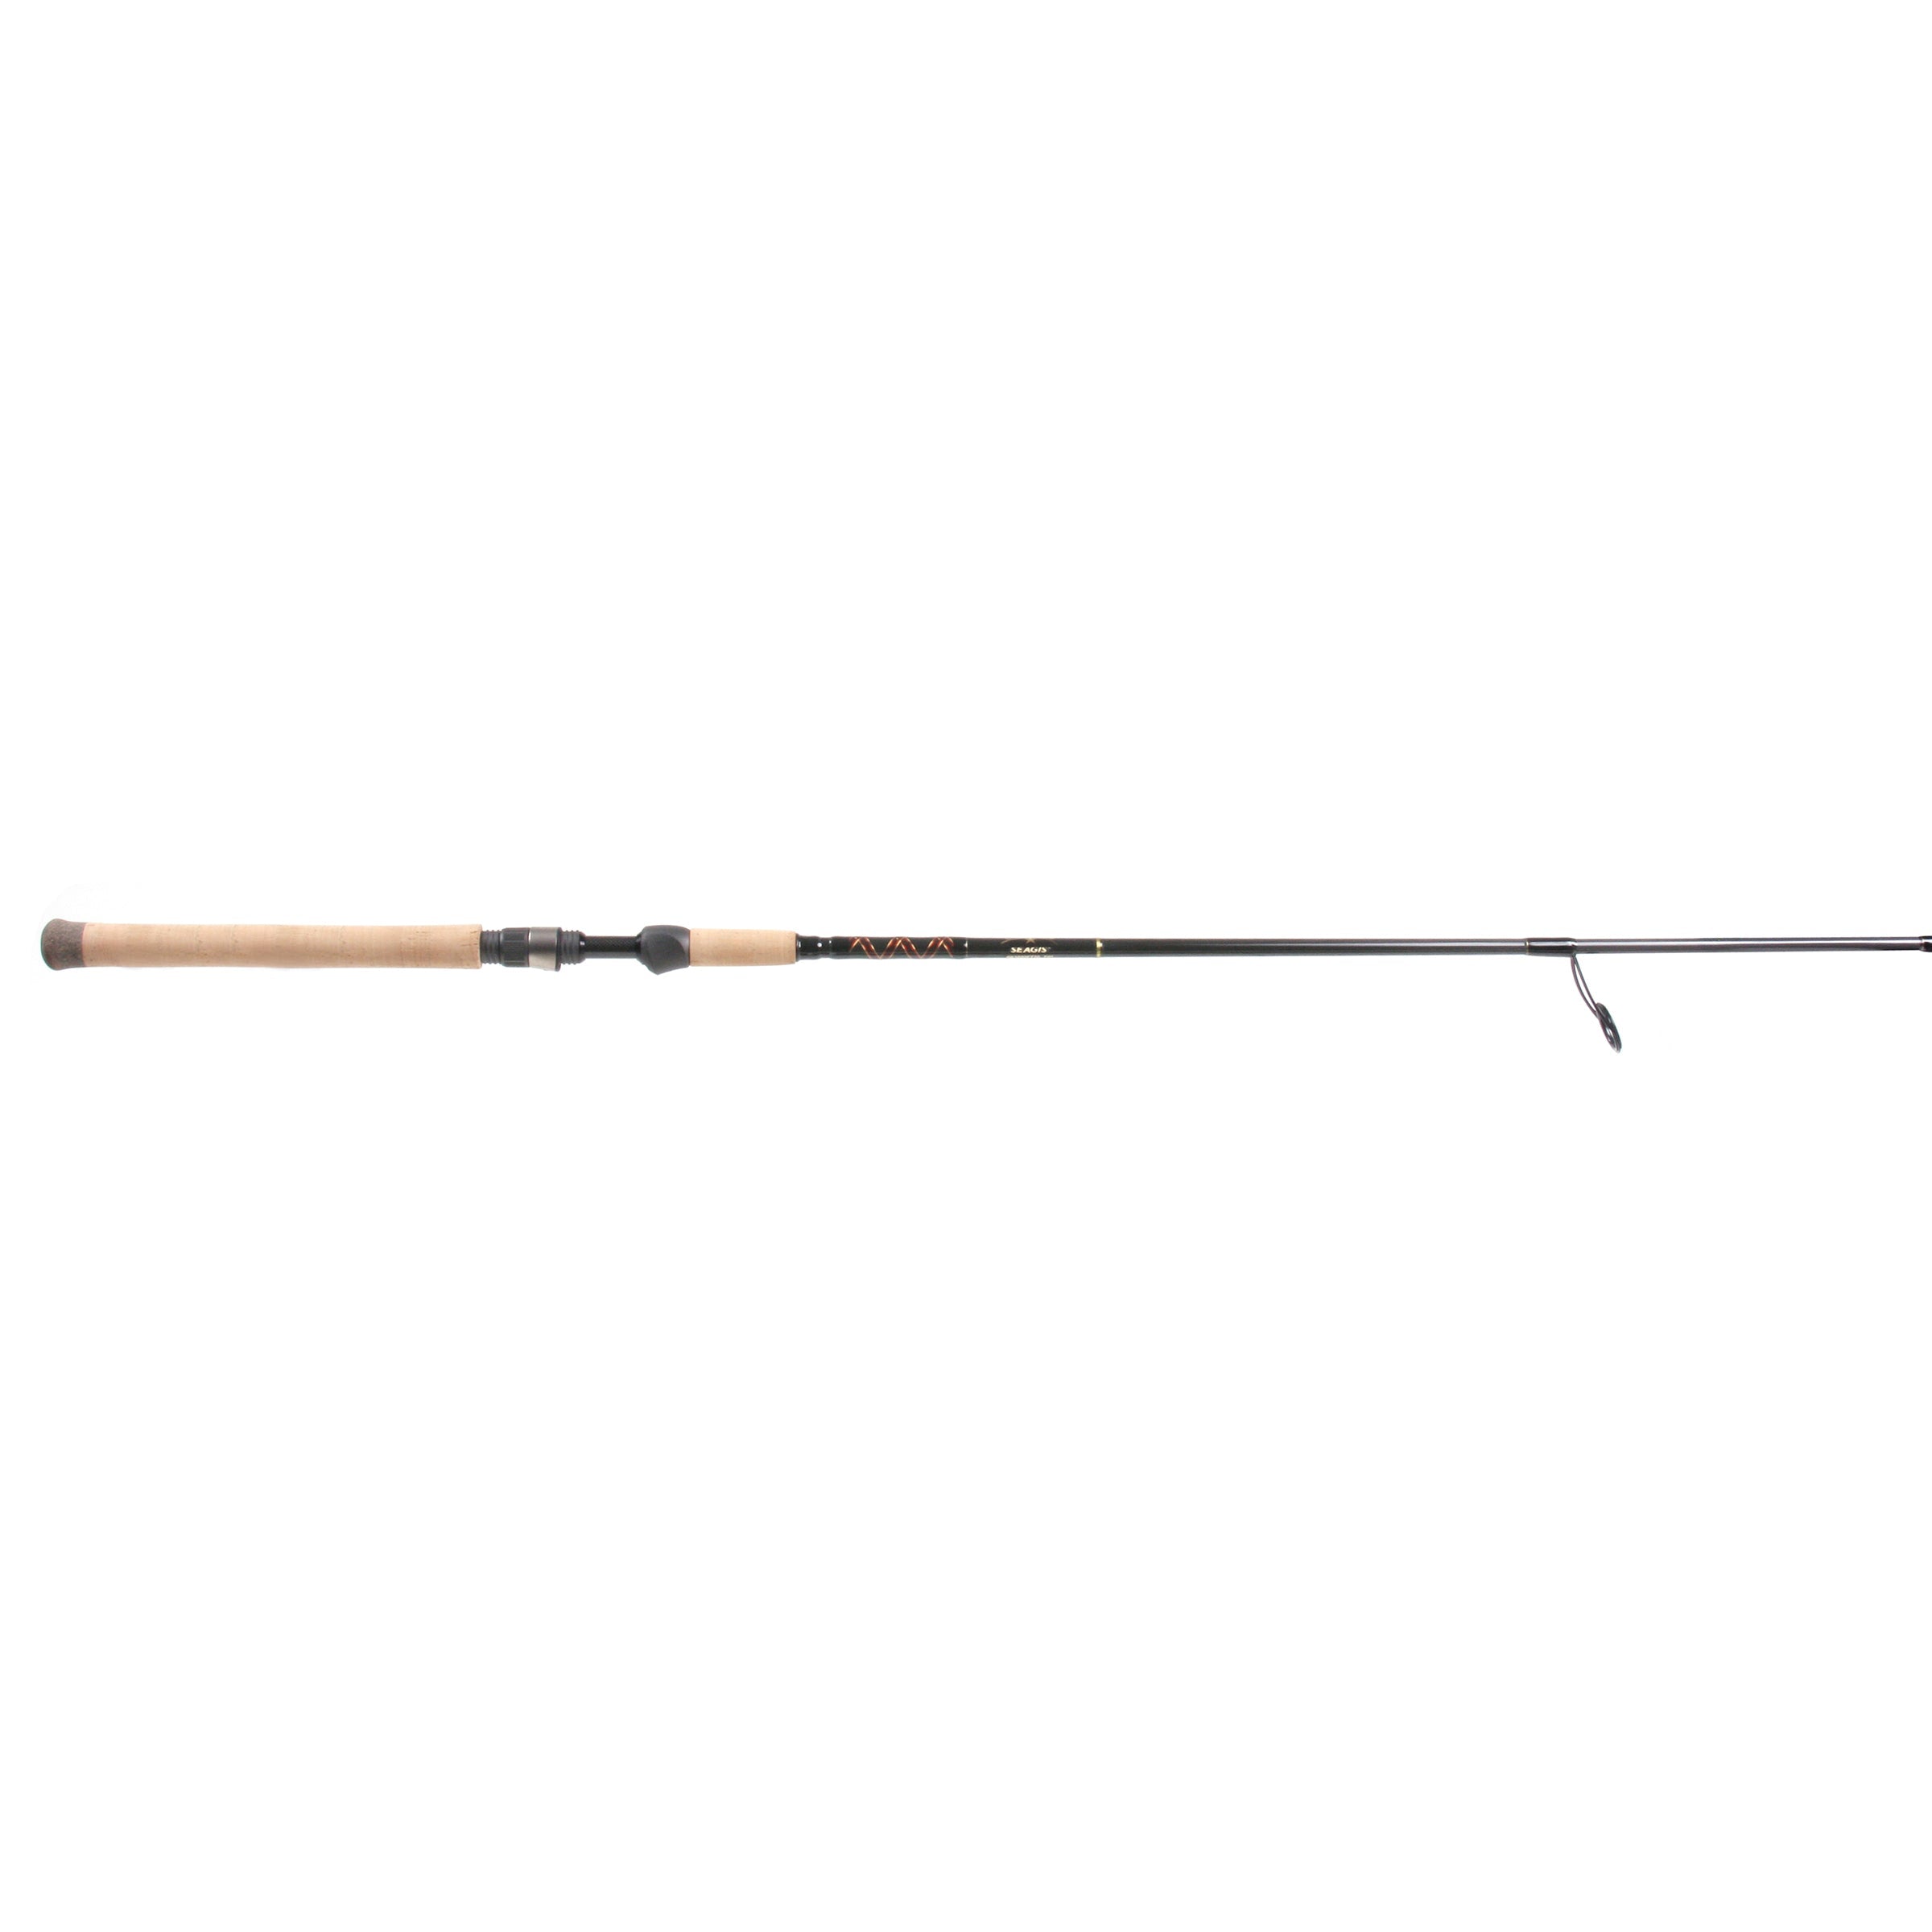 Seagis® Inshore Spinning Rods